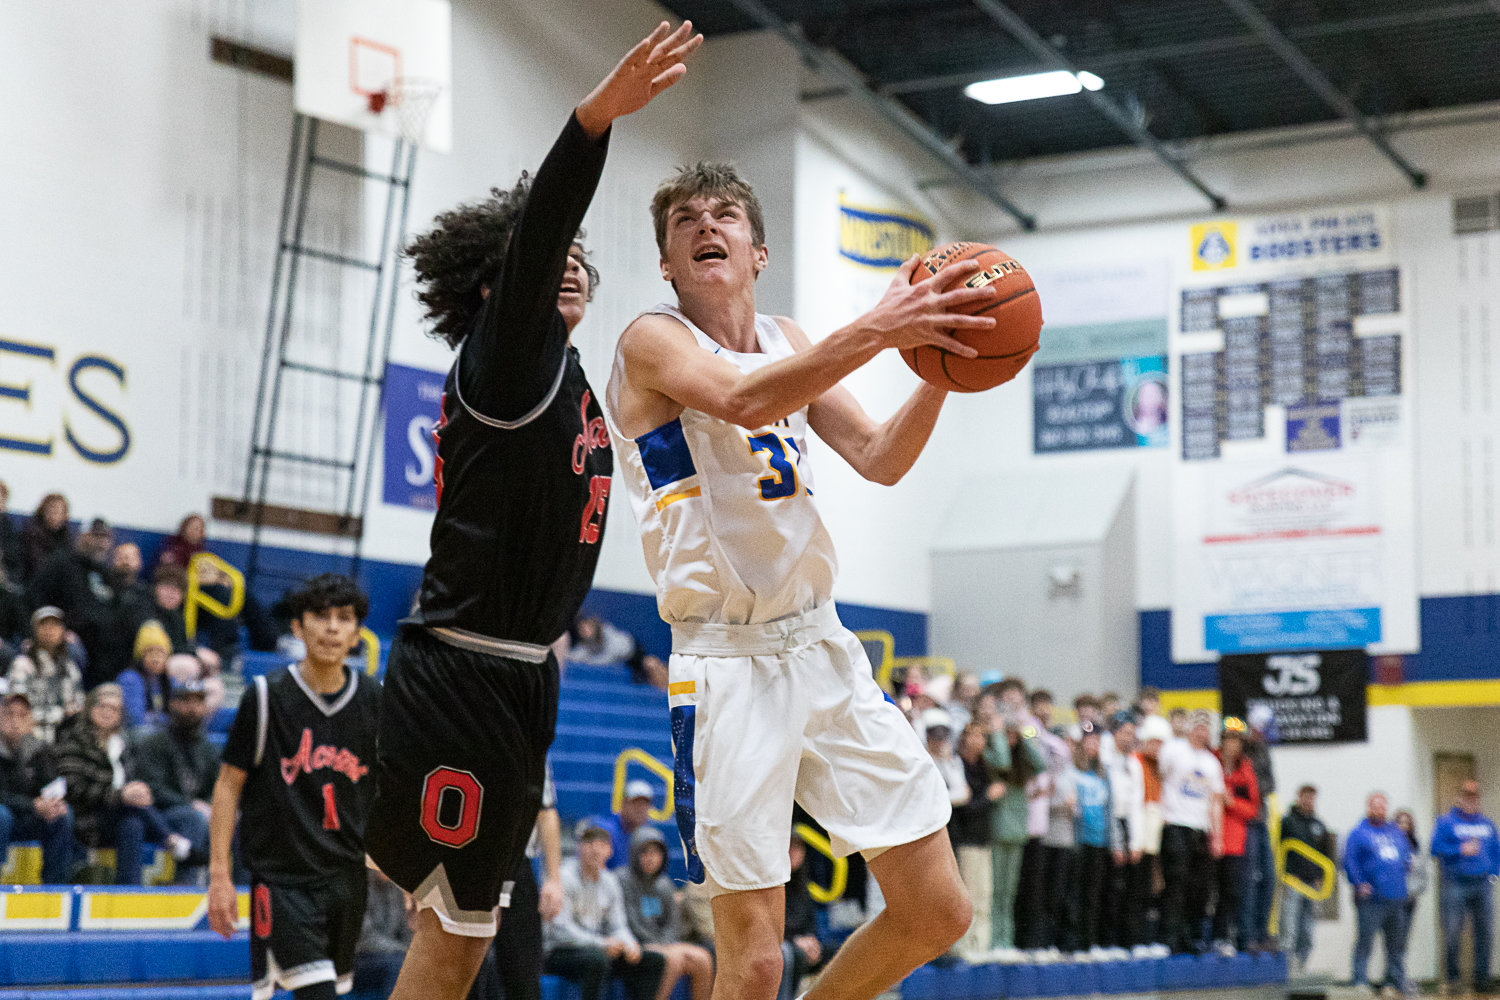 Adna guard Seth Meister drives for a layup against Oakville Dec. 27.